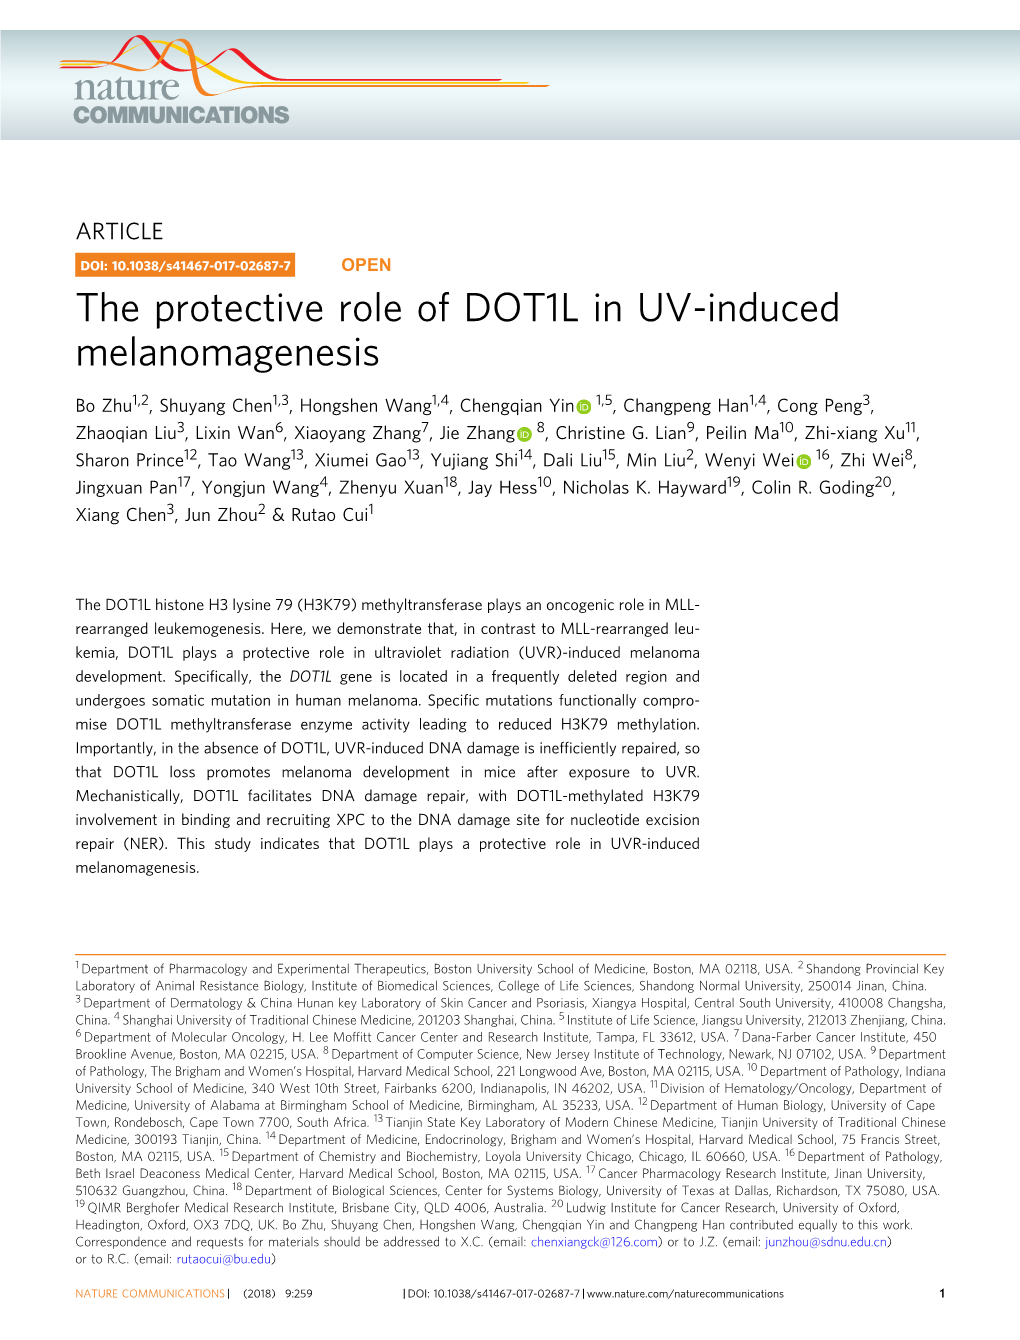 The Protective Role of DOT1L in UV-Induced Melanomagenesis